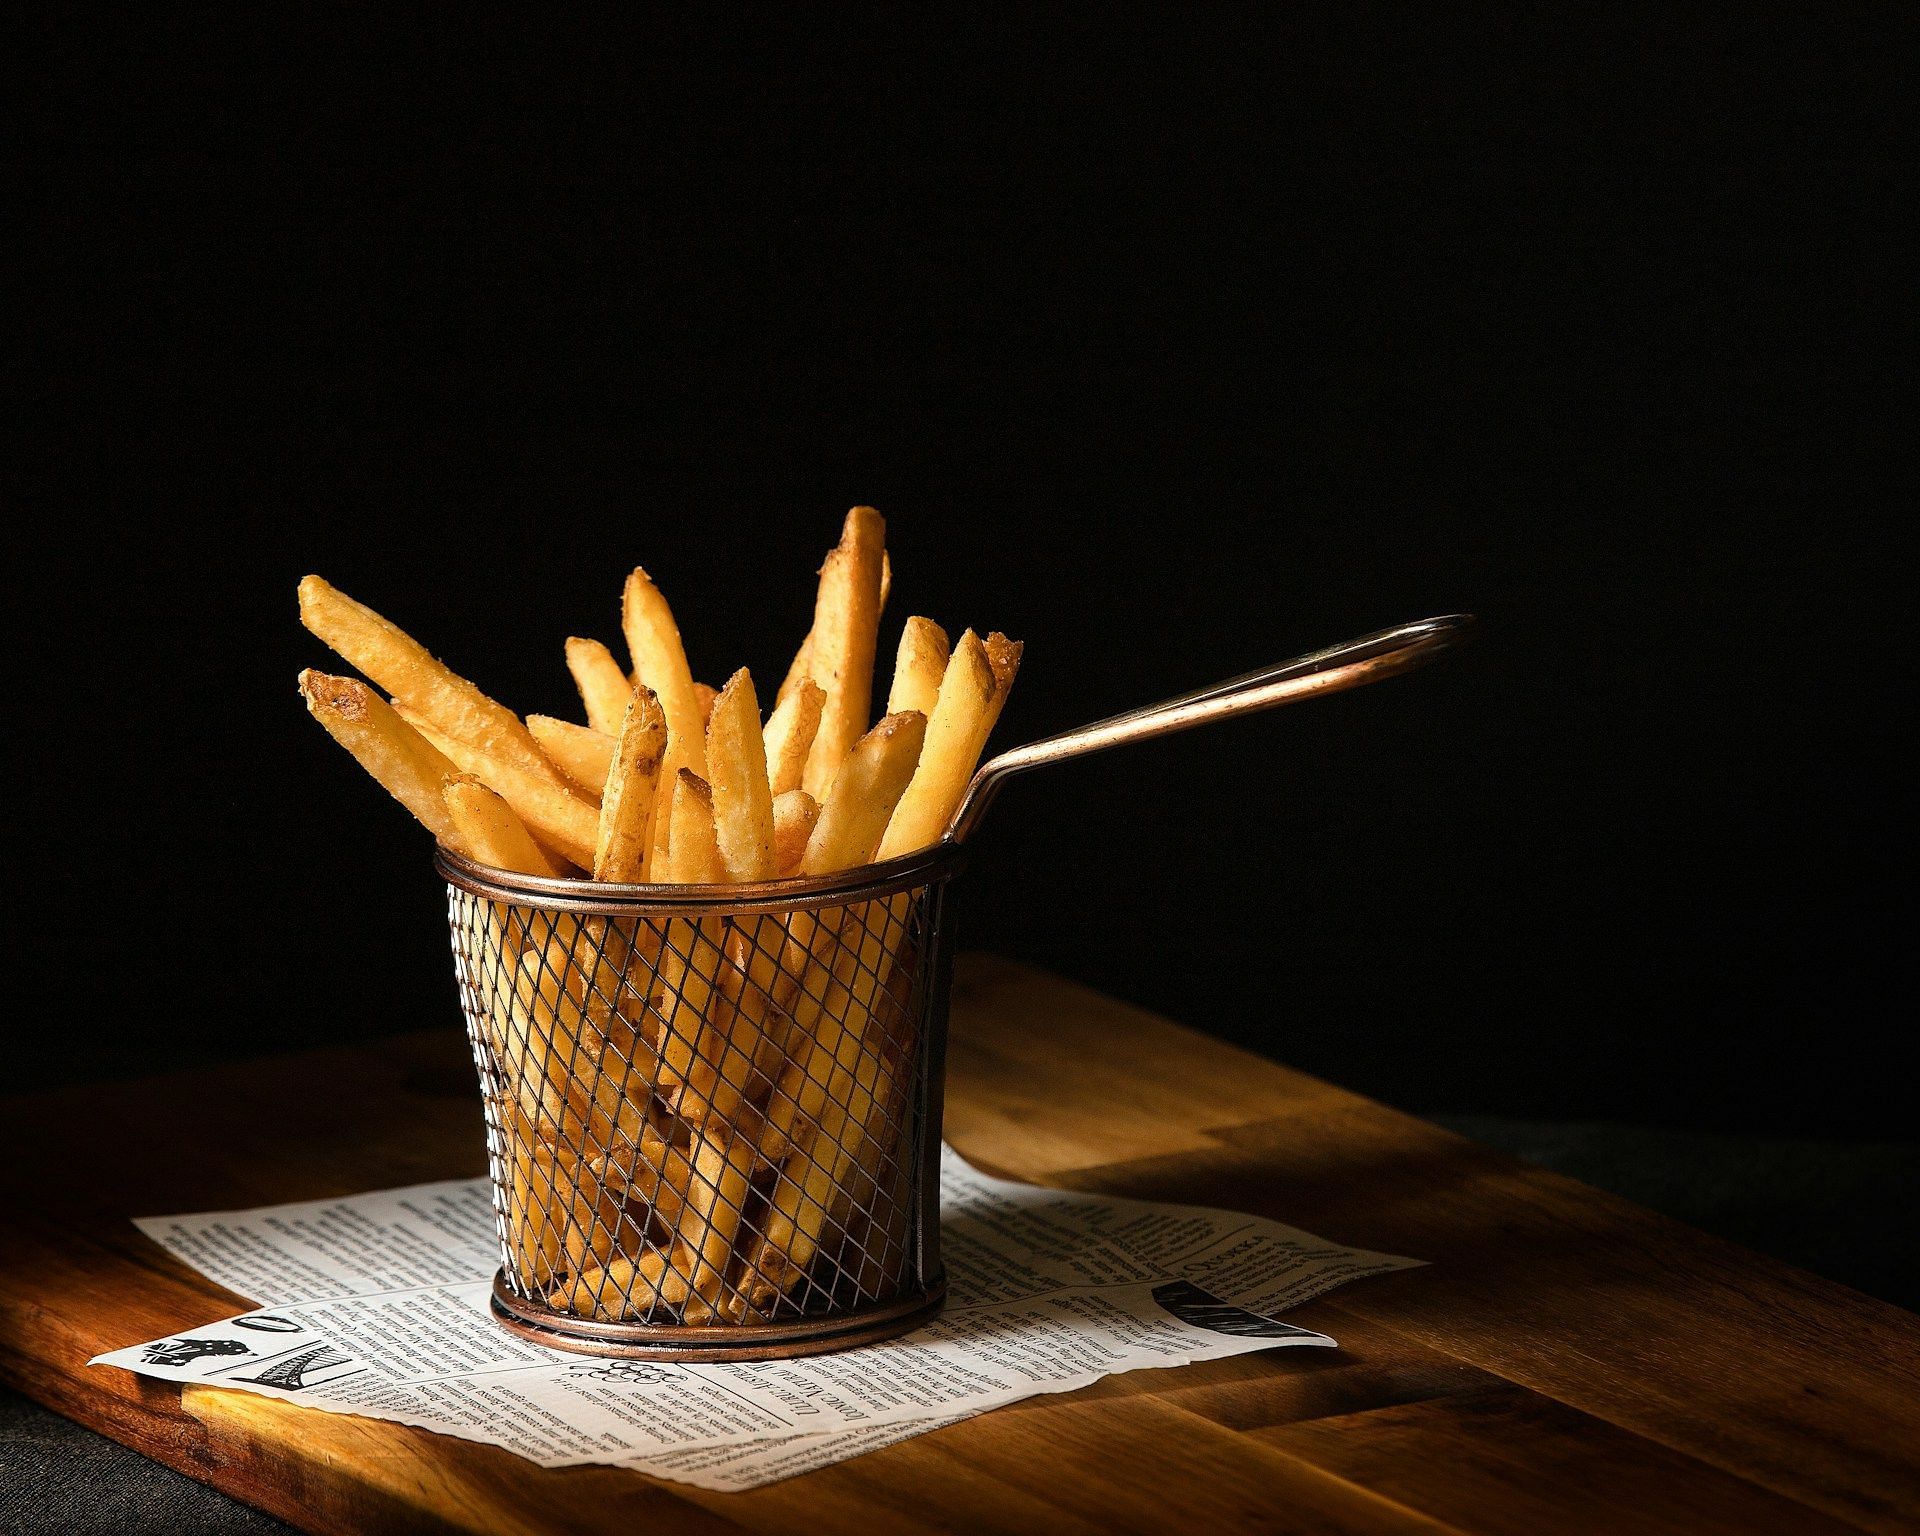 Say no to fries (Image by Mitchell Luo/Unsplash)